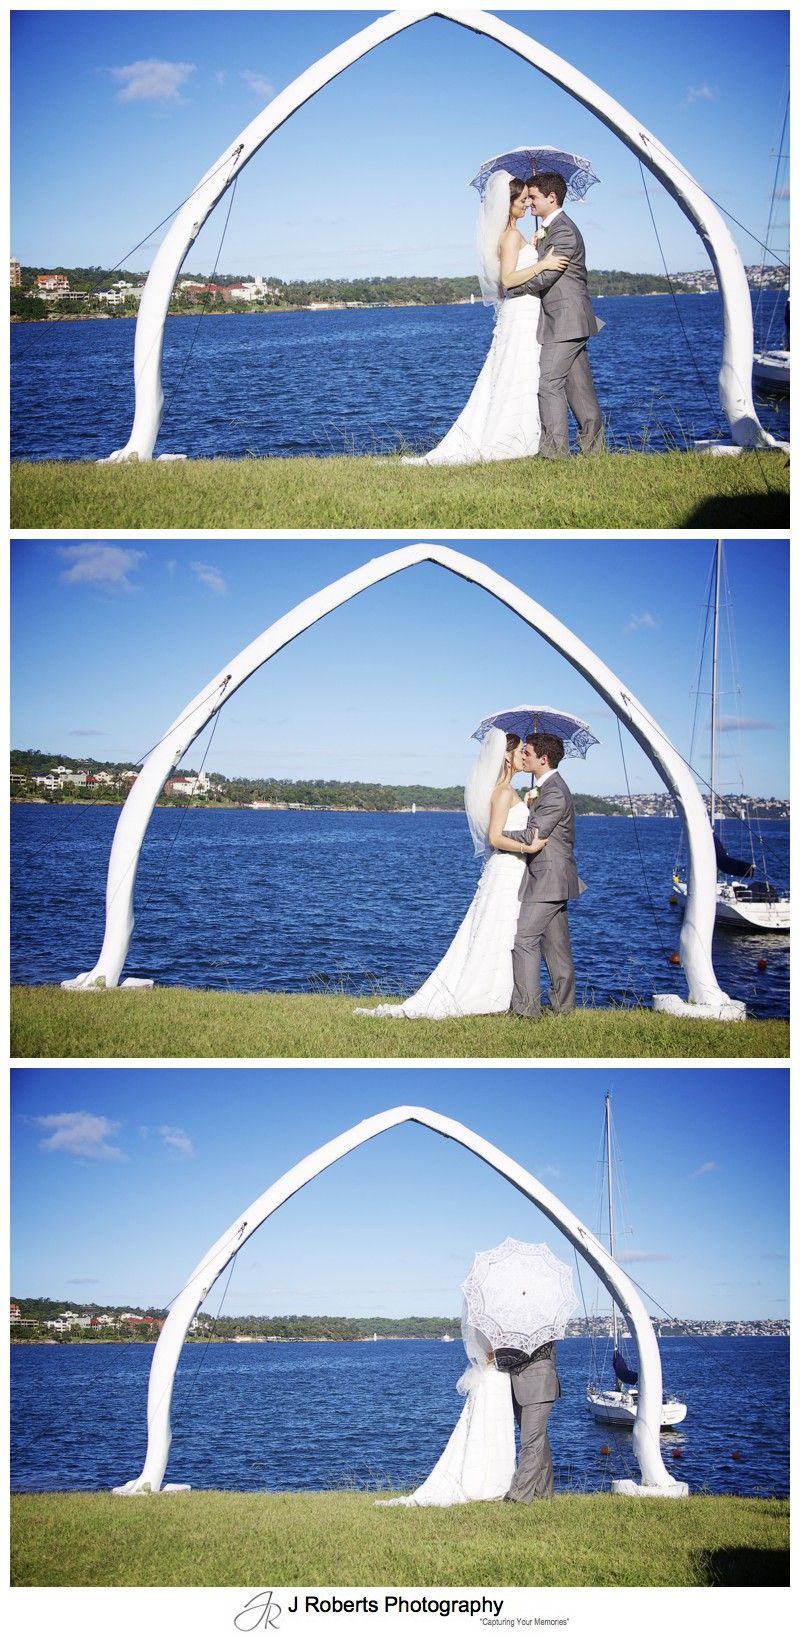 Bride and groom with parasol on Sydney Harbour - wedding photography sydney